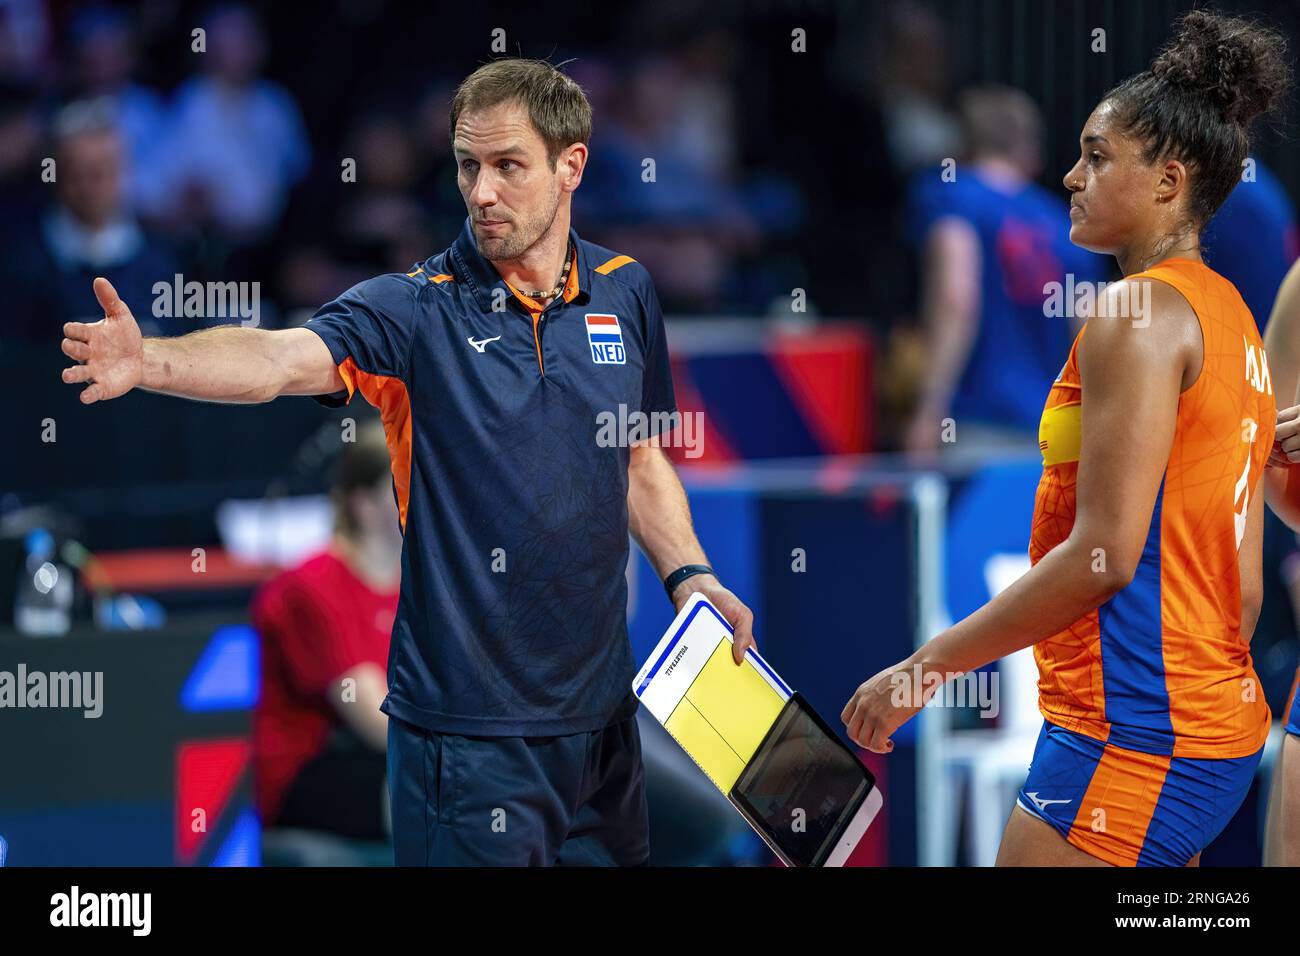 BRUSSELS - Coach Felix Koslowski in action during the semifinals of the European Volleyball Championship against reigning world champion Serbia